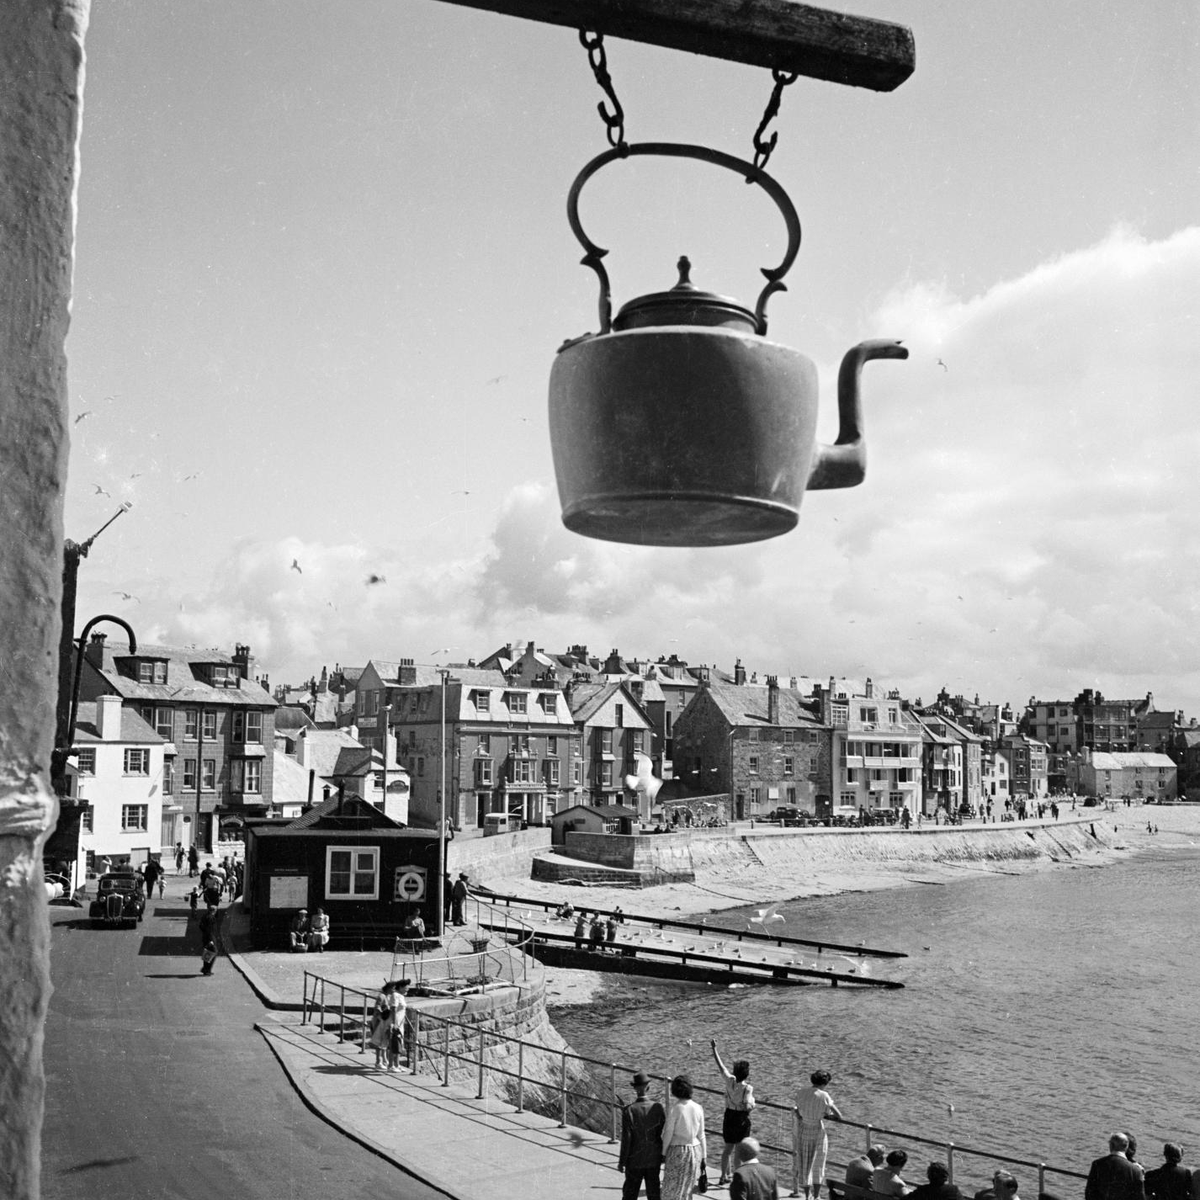 It's International Tea Day, and what a perfect place to spill some tea. ☕

Once the reserve of the rich, tea was popularised in England by Catherine of Braganza, Queen Consort of Charles II.

This photo was taken in 1950 by John Gay at a former tea shop in St Ives, Cornwall.